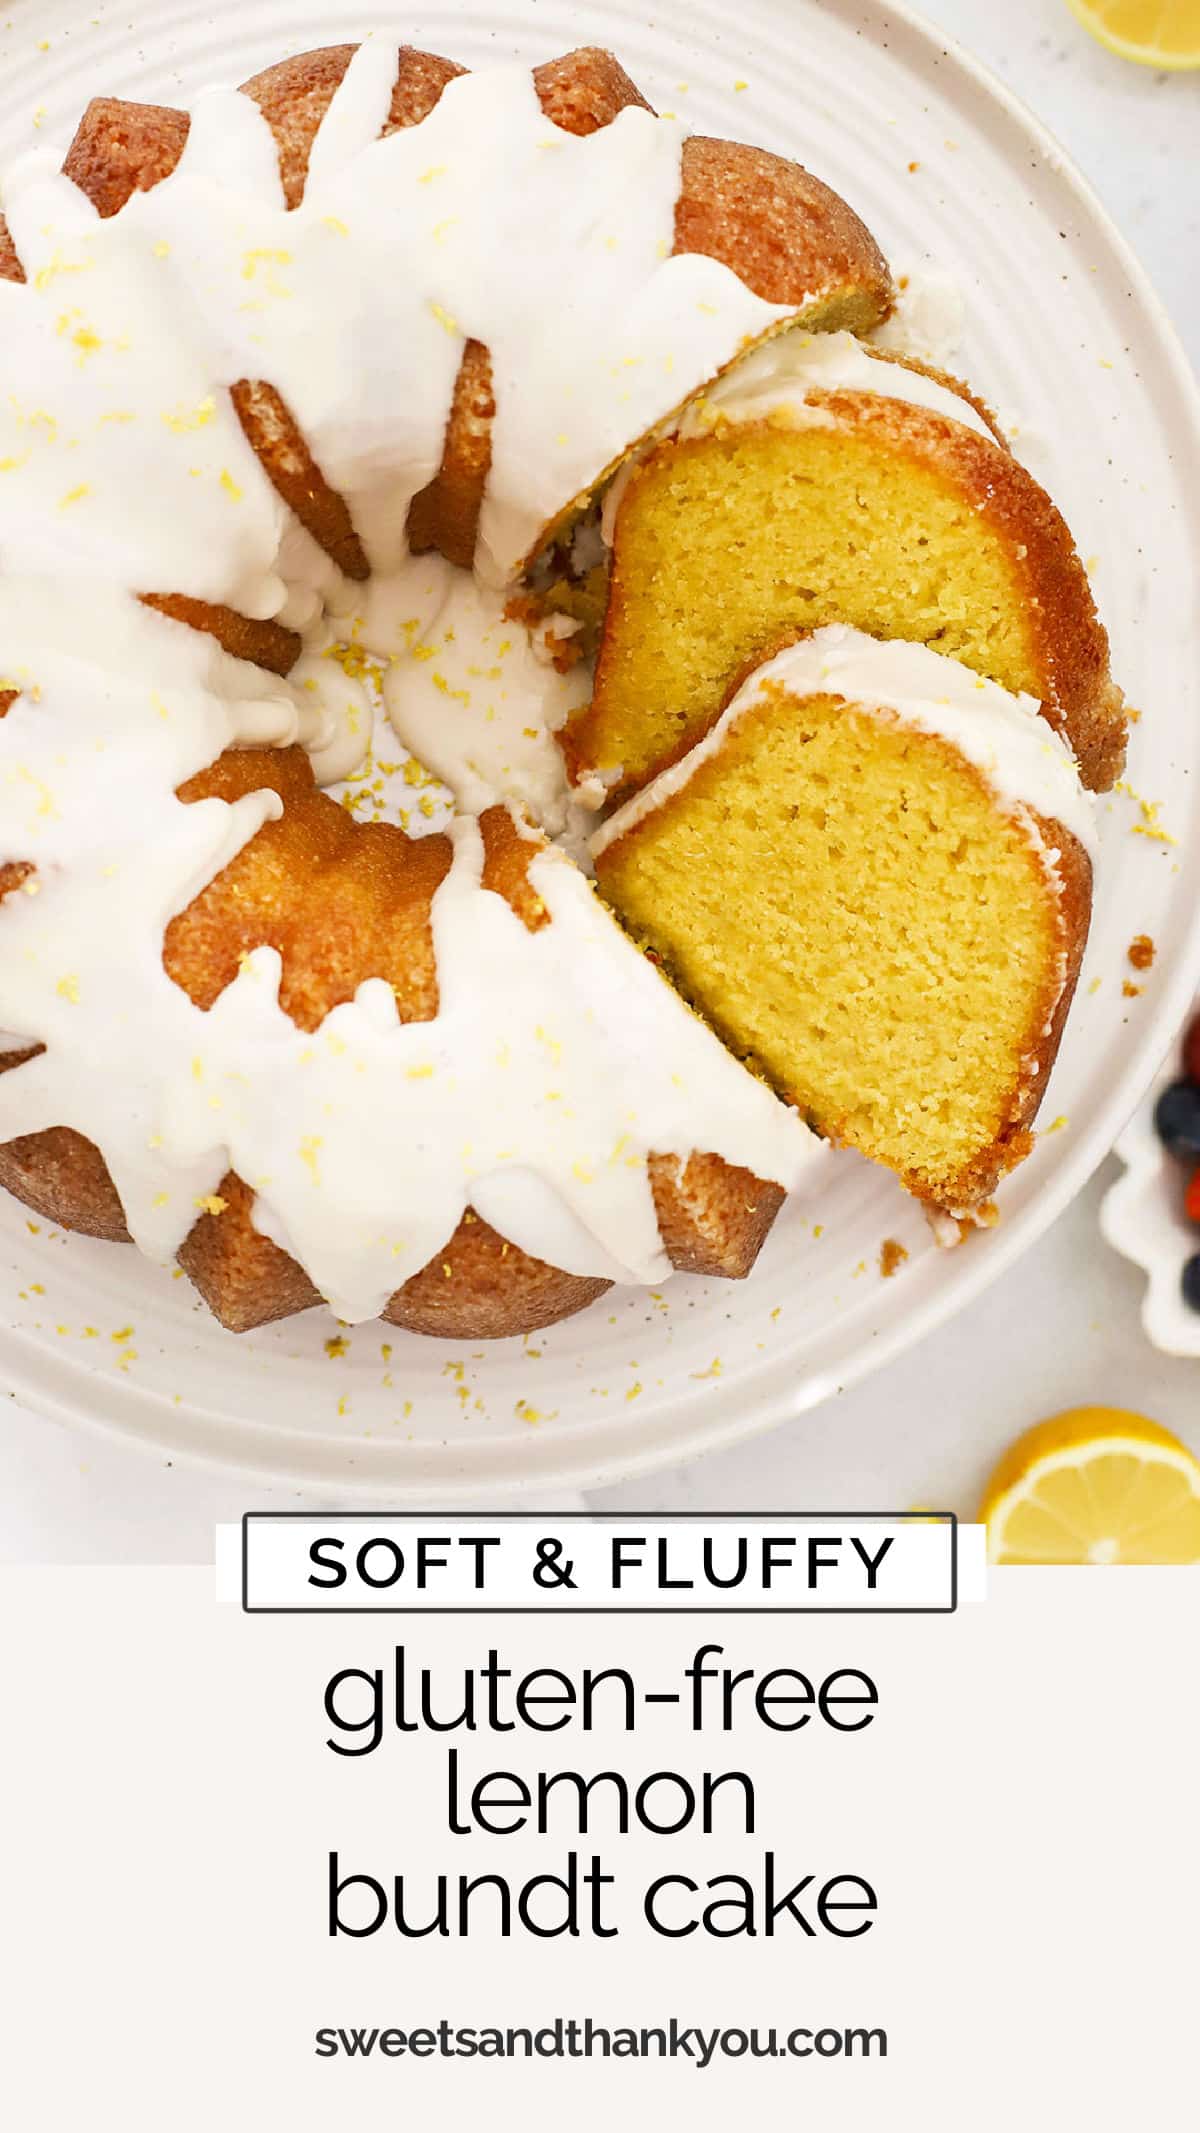 This gluten-free lemon bundt cake recipe is bursting with fresh lemon flavor and a soft, fluffy texture you're going to LOVE. / gluten free lemon cake recipe / gluten-free lemon pound cake / gluten free bundt cake recipe / gluten-free cake recipe / gluten-free lemon bundt recipe / lemon bundt cake without pudding mix / gluten-free lemon bundt cake from scratch